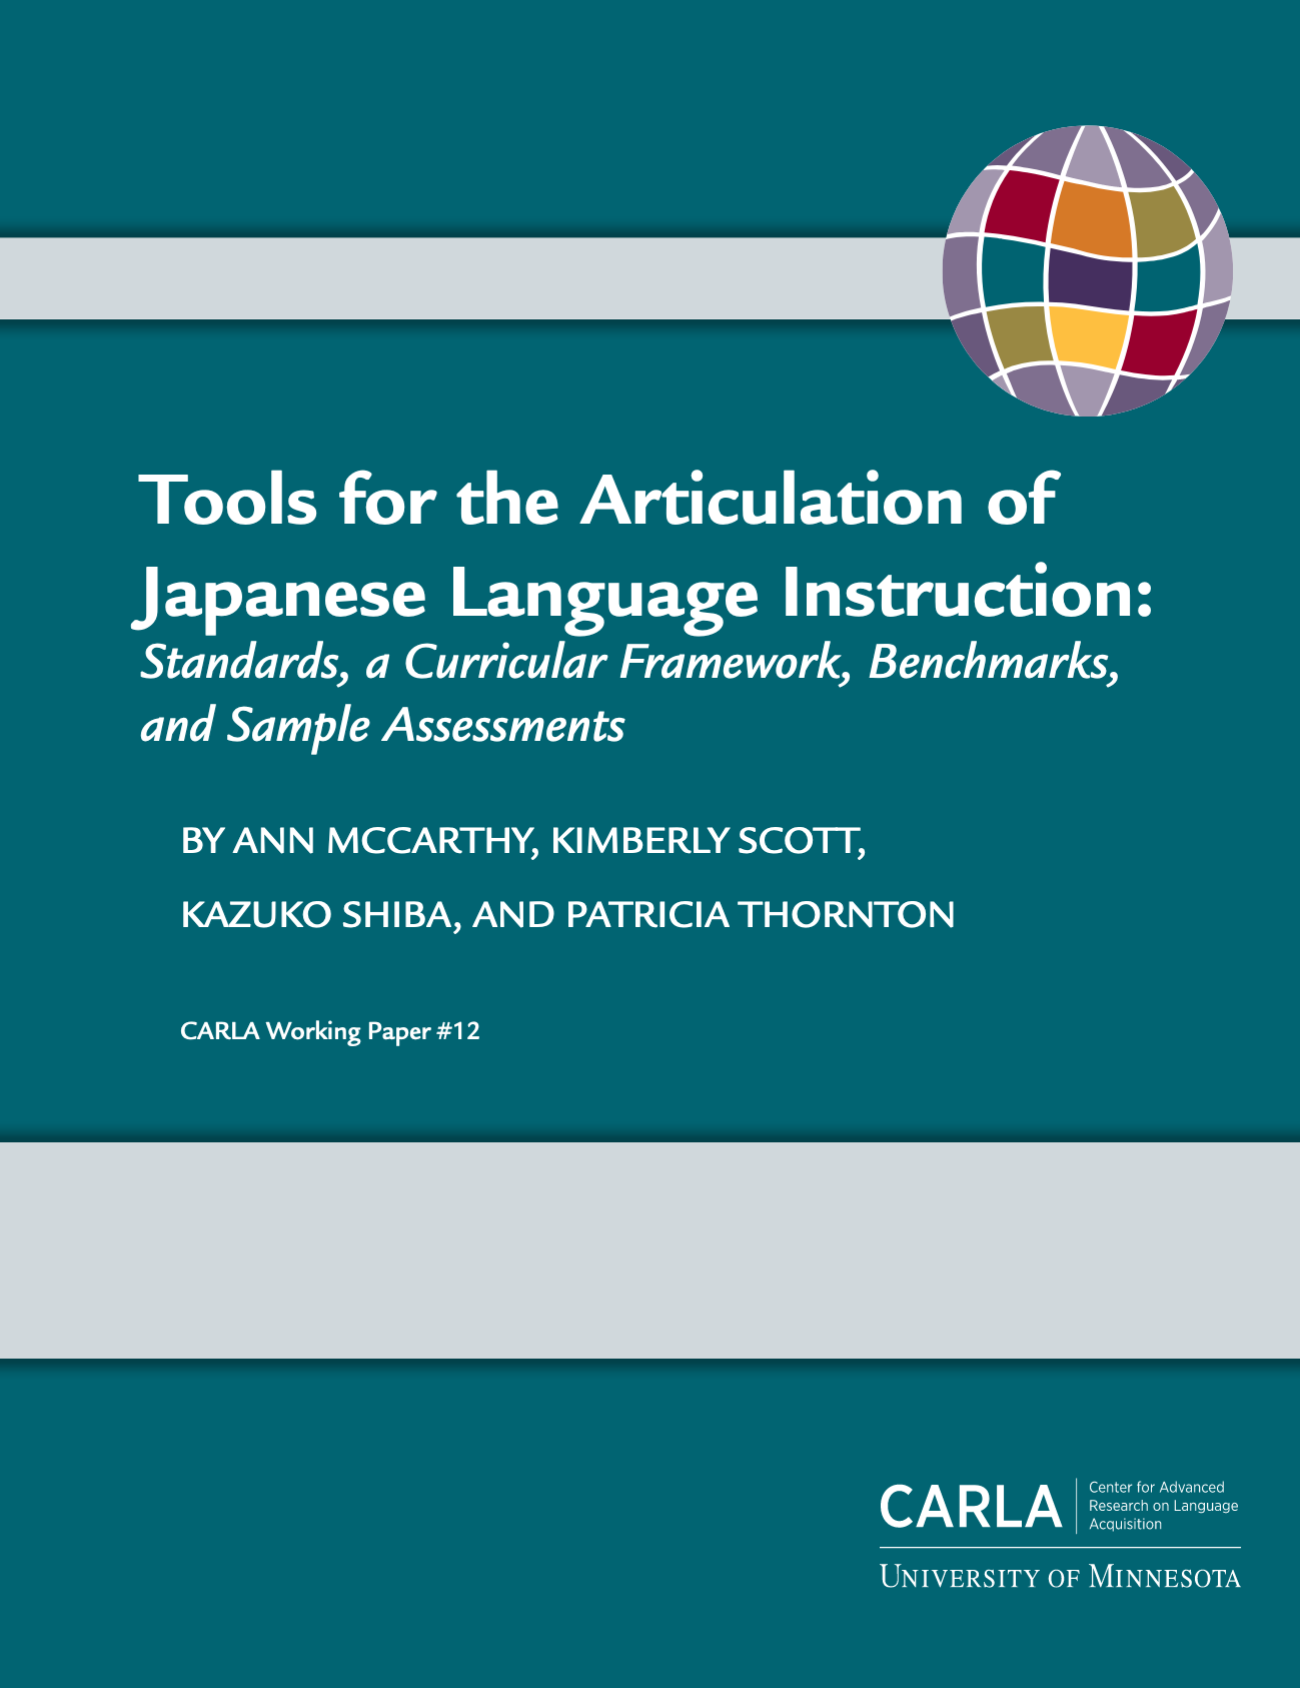 Tools for the Articulation of Japanese Language Instruction